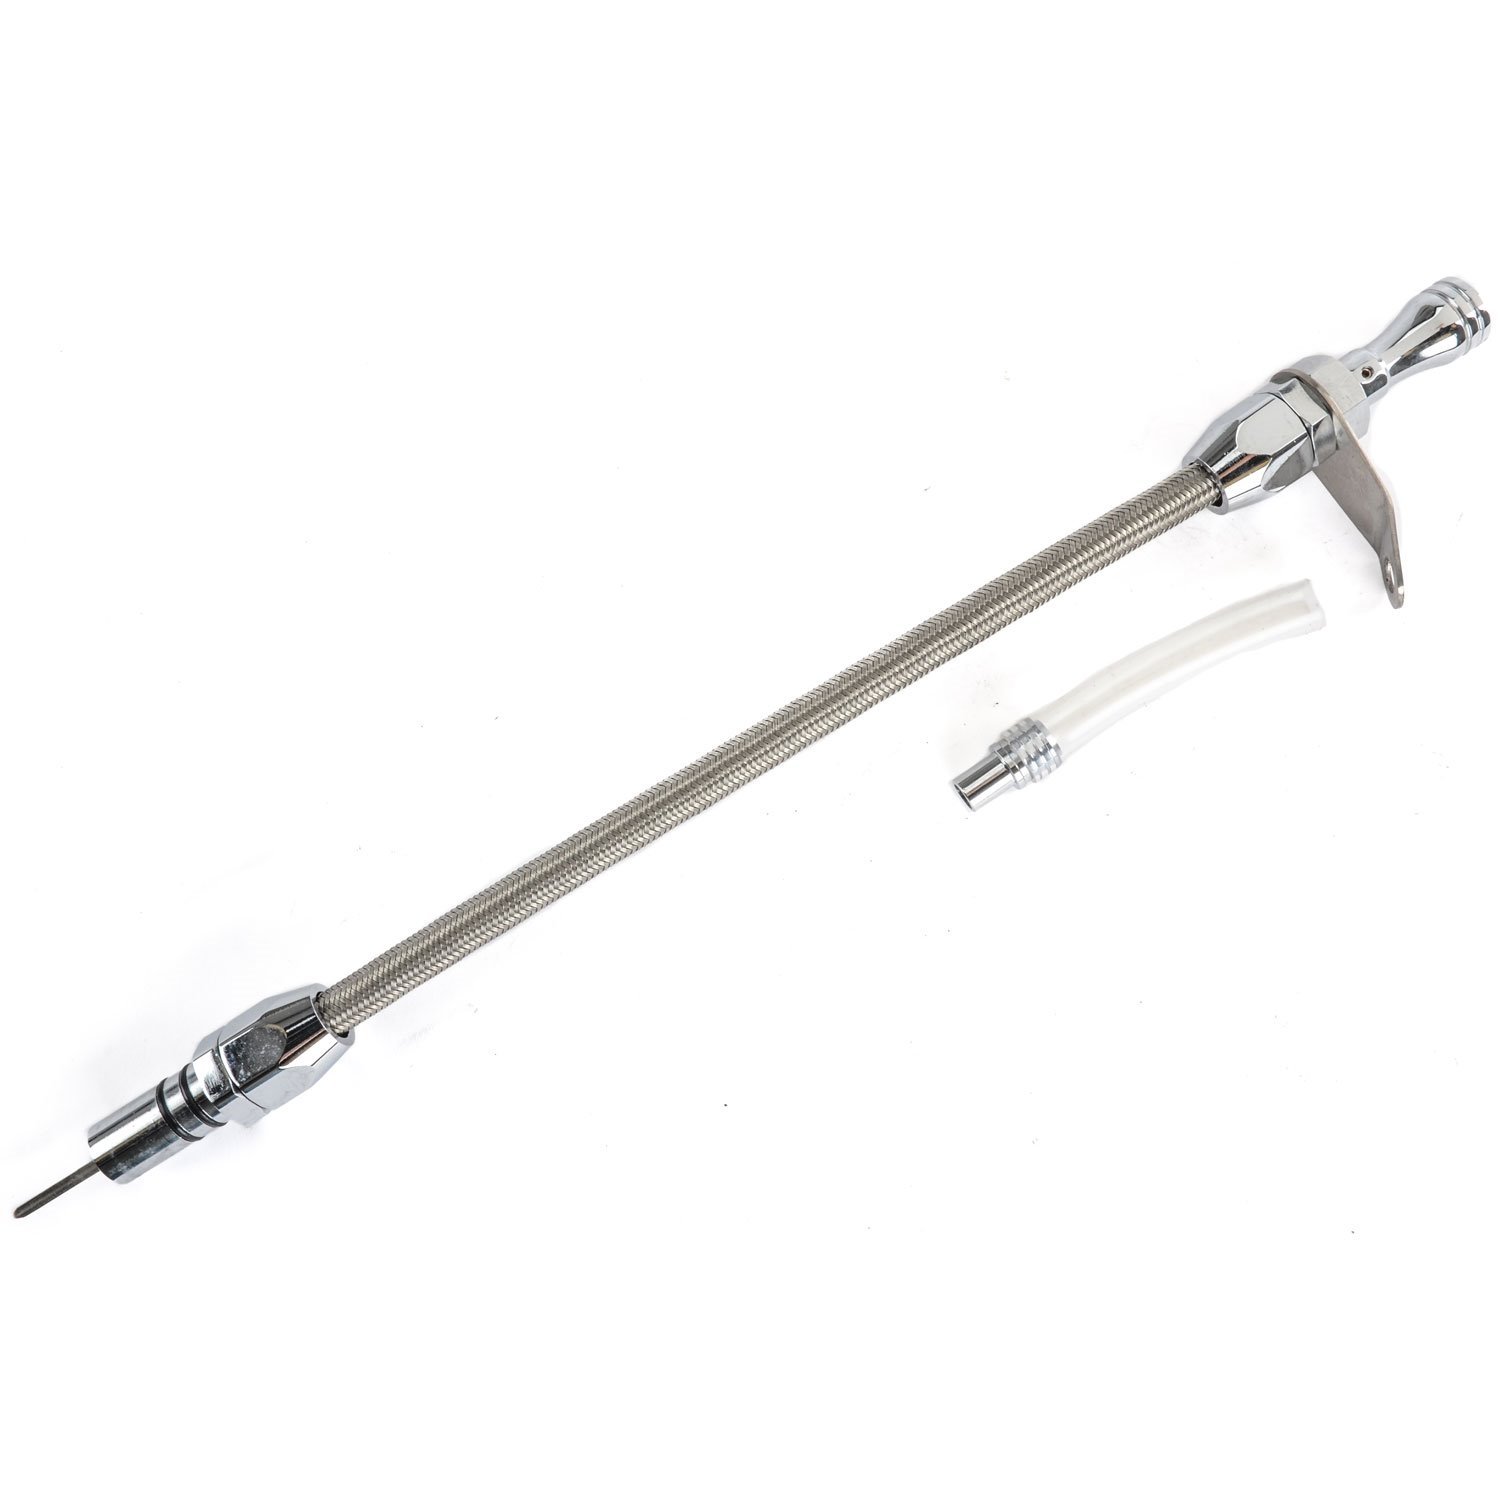 Flexible Braided Transmission Dipstick for TH350/TH400 [Polished]